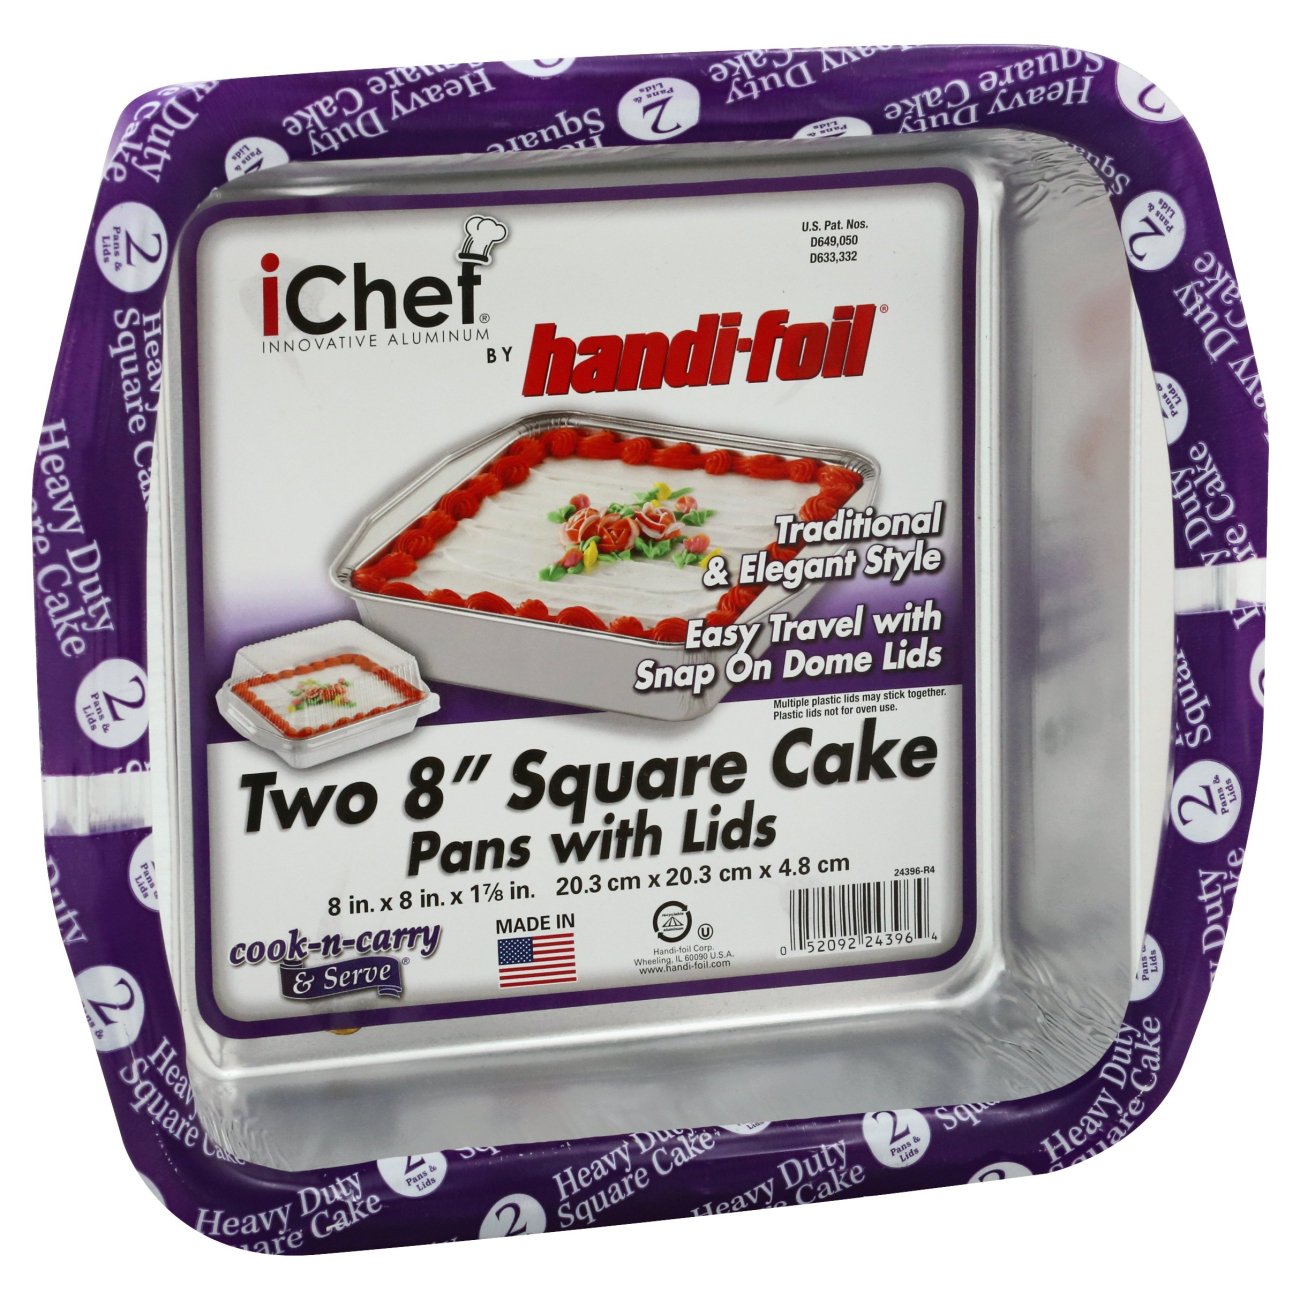 Handi-foil® Cook-n-Carry Cake Pans & Lids - Silver, 4 pk / 13 x 9 in - Fred  Meyer